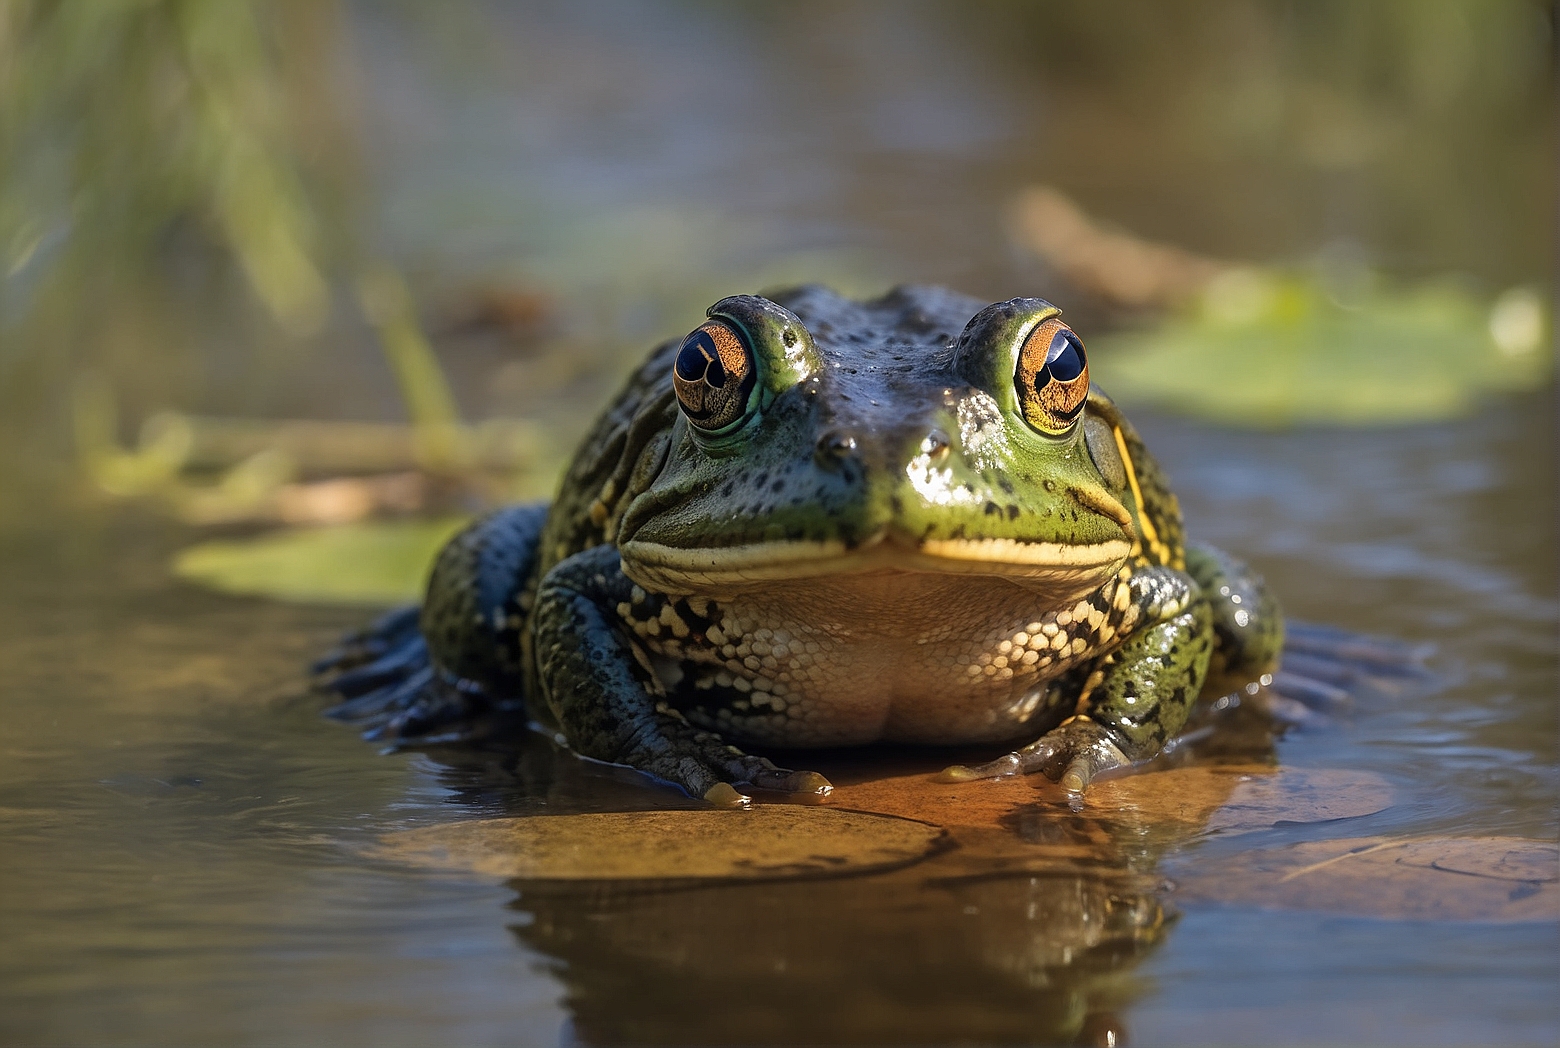 Do Bullfrogs Consume Other Frogs?